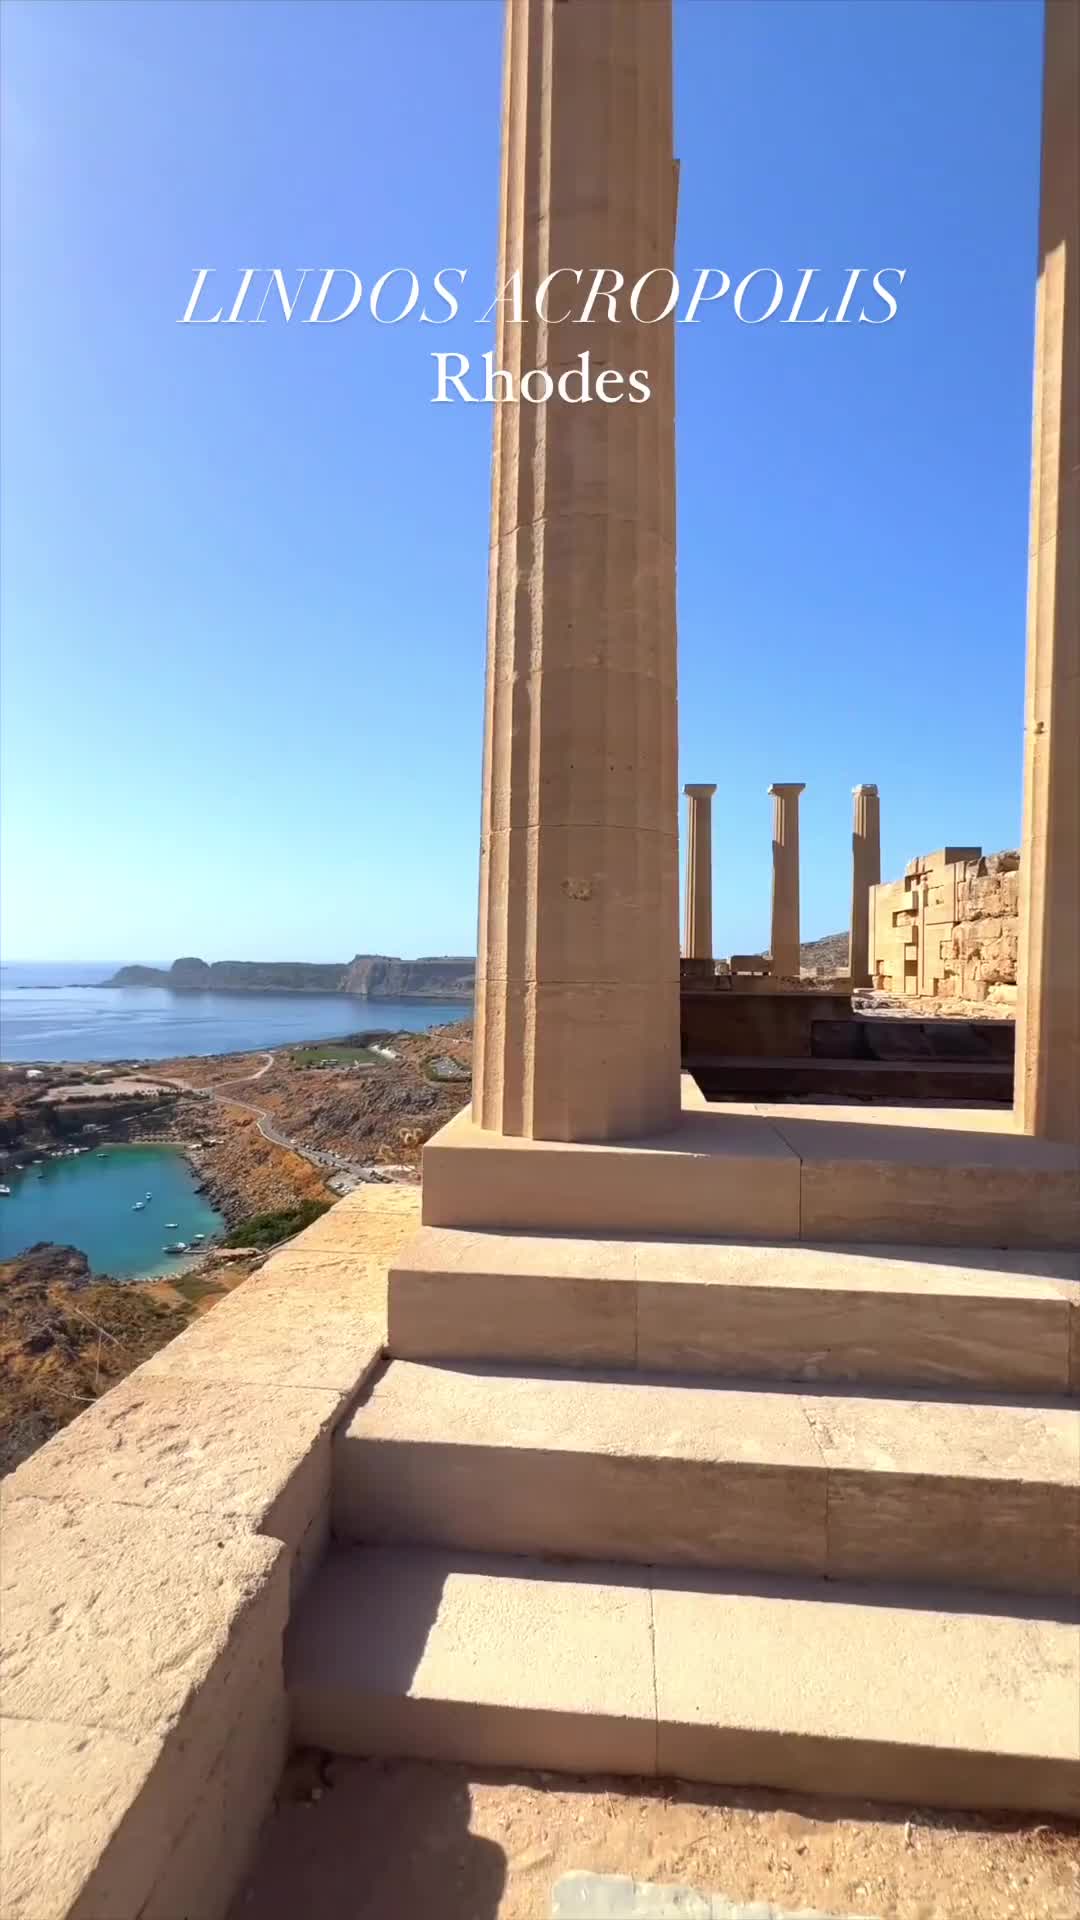 Exploring the Lindos Acropolis of Rhodes 🏛️. Tag someone who loves Greece 🇬🇷
📌The ticket cost 12€
📌 If you want to enjoy it the best time to go is in early morning around 9:00 before all the bus full of people come
📌really important is not allowed to fly with drone 
.
.
#reelsinstagram #reeltrending #reelitfeelit #greece #sheisnotlost #rhodes #lindosacropolis #dametraveler #ig_greece #exploretocreate  #travelblogger #girlslovetravel #sheisnotlost #greece🇬🇷 #europetravel #ig_europe #passionpassport #gltlove #roamtheplanet #girlslovetravel #greekisland #travelreels  #beautifuldestinations #visitgreece  #globelletravels